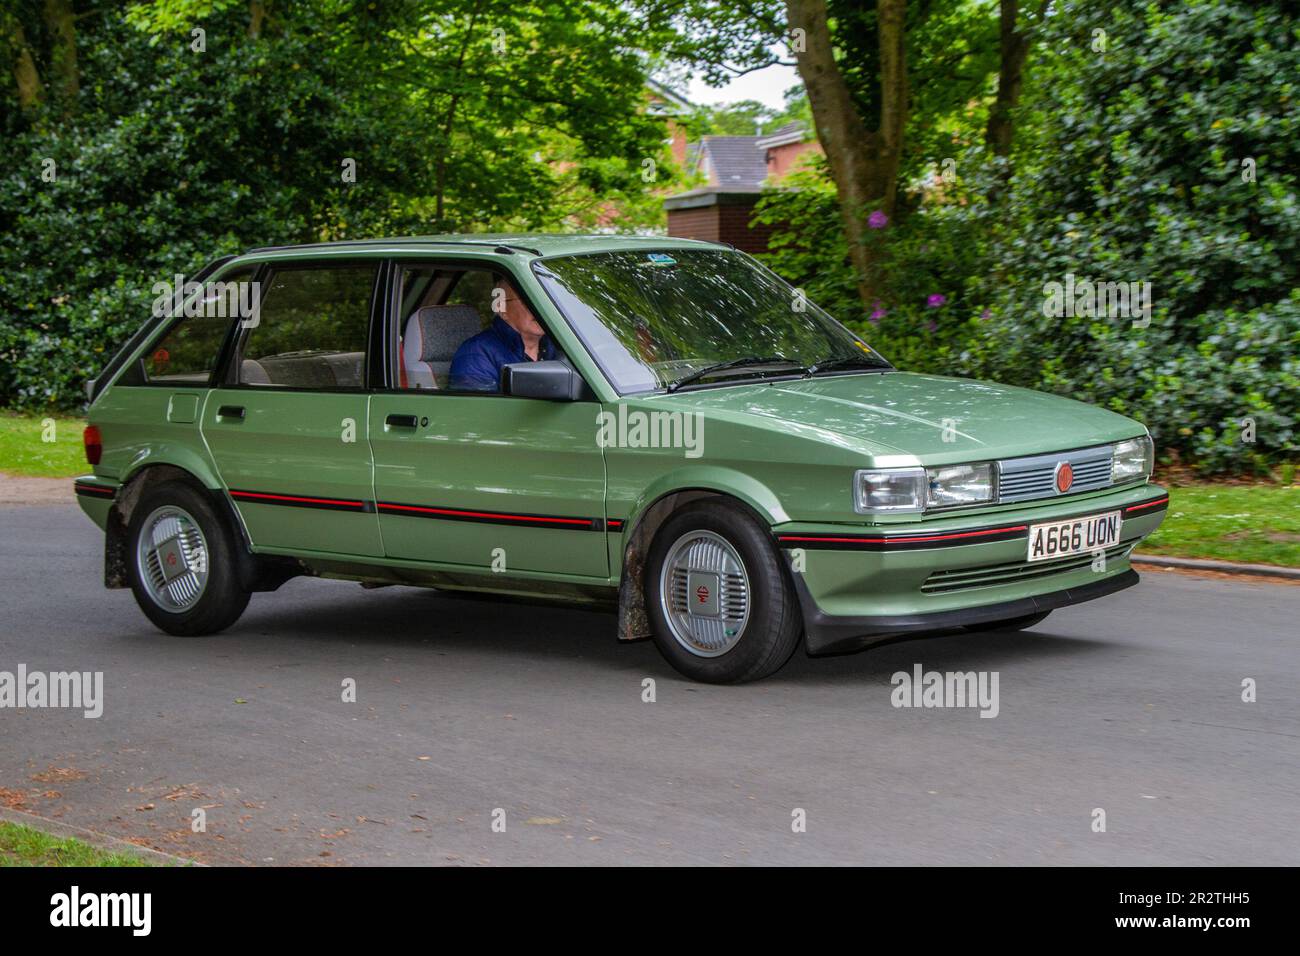 1983 80s eighties Green MG MAESTRO 1600cc petrol, five-door hatchback small family car; at the Lytham Hall St Annes Classic & Performance Motor vehicle show displays of classic cars, UK Stock Photo